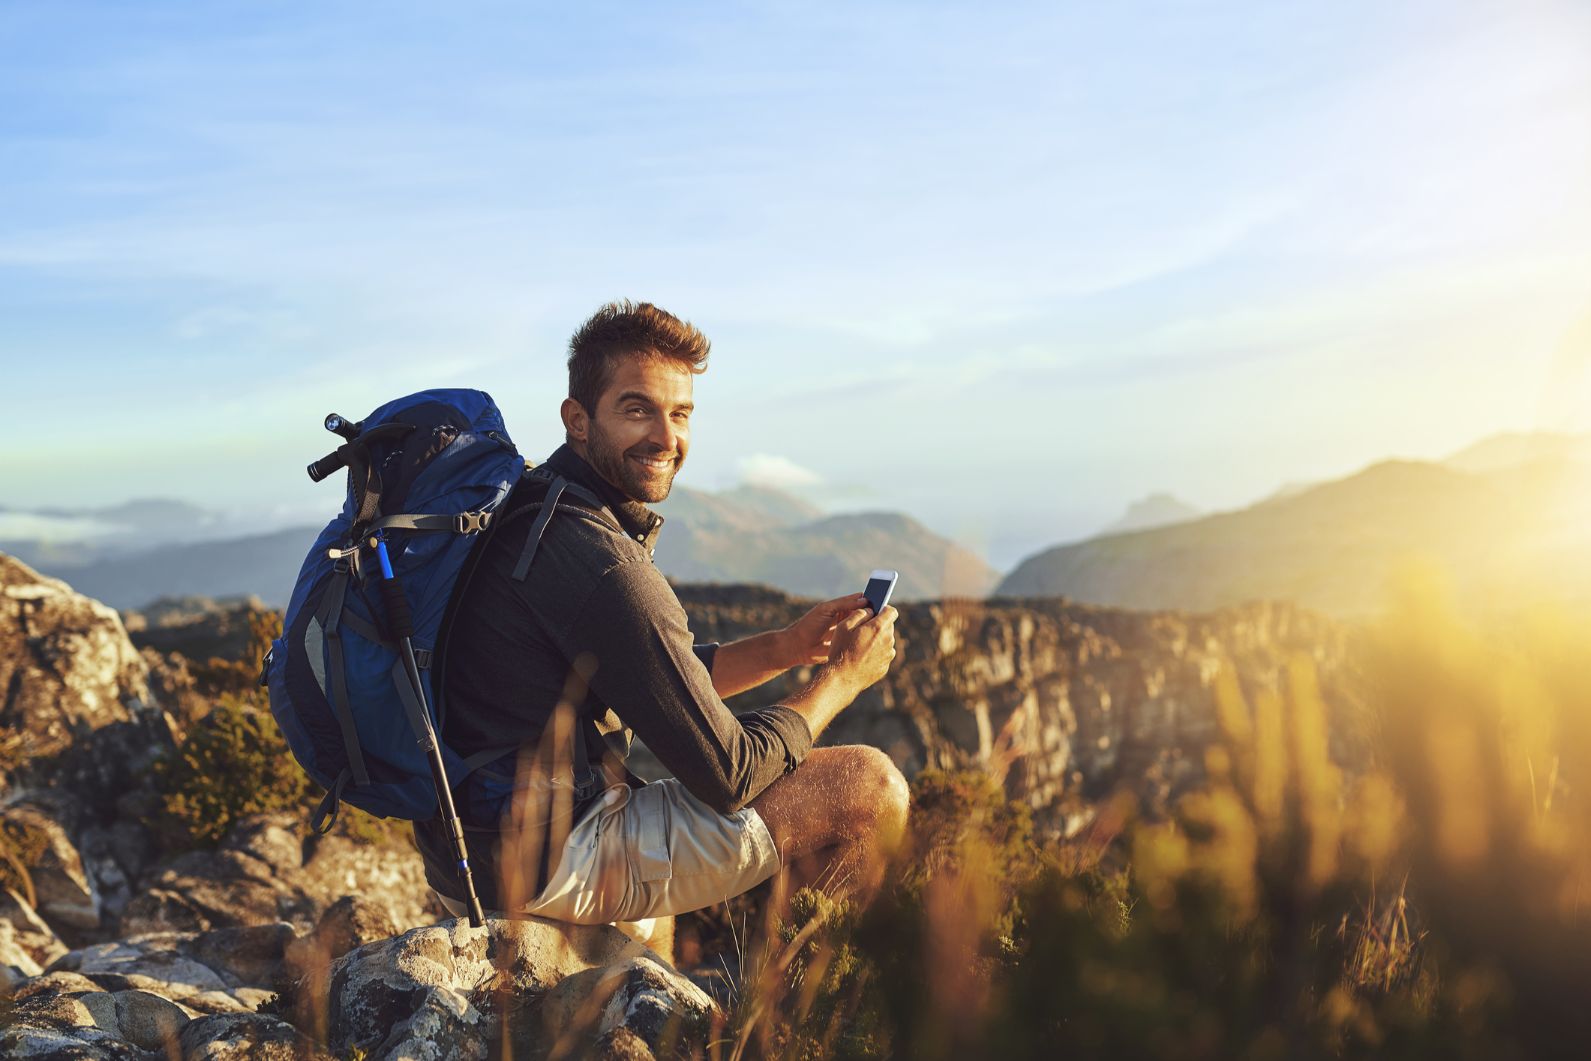 A solo male hiker in the mountains, holding a phone.